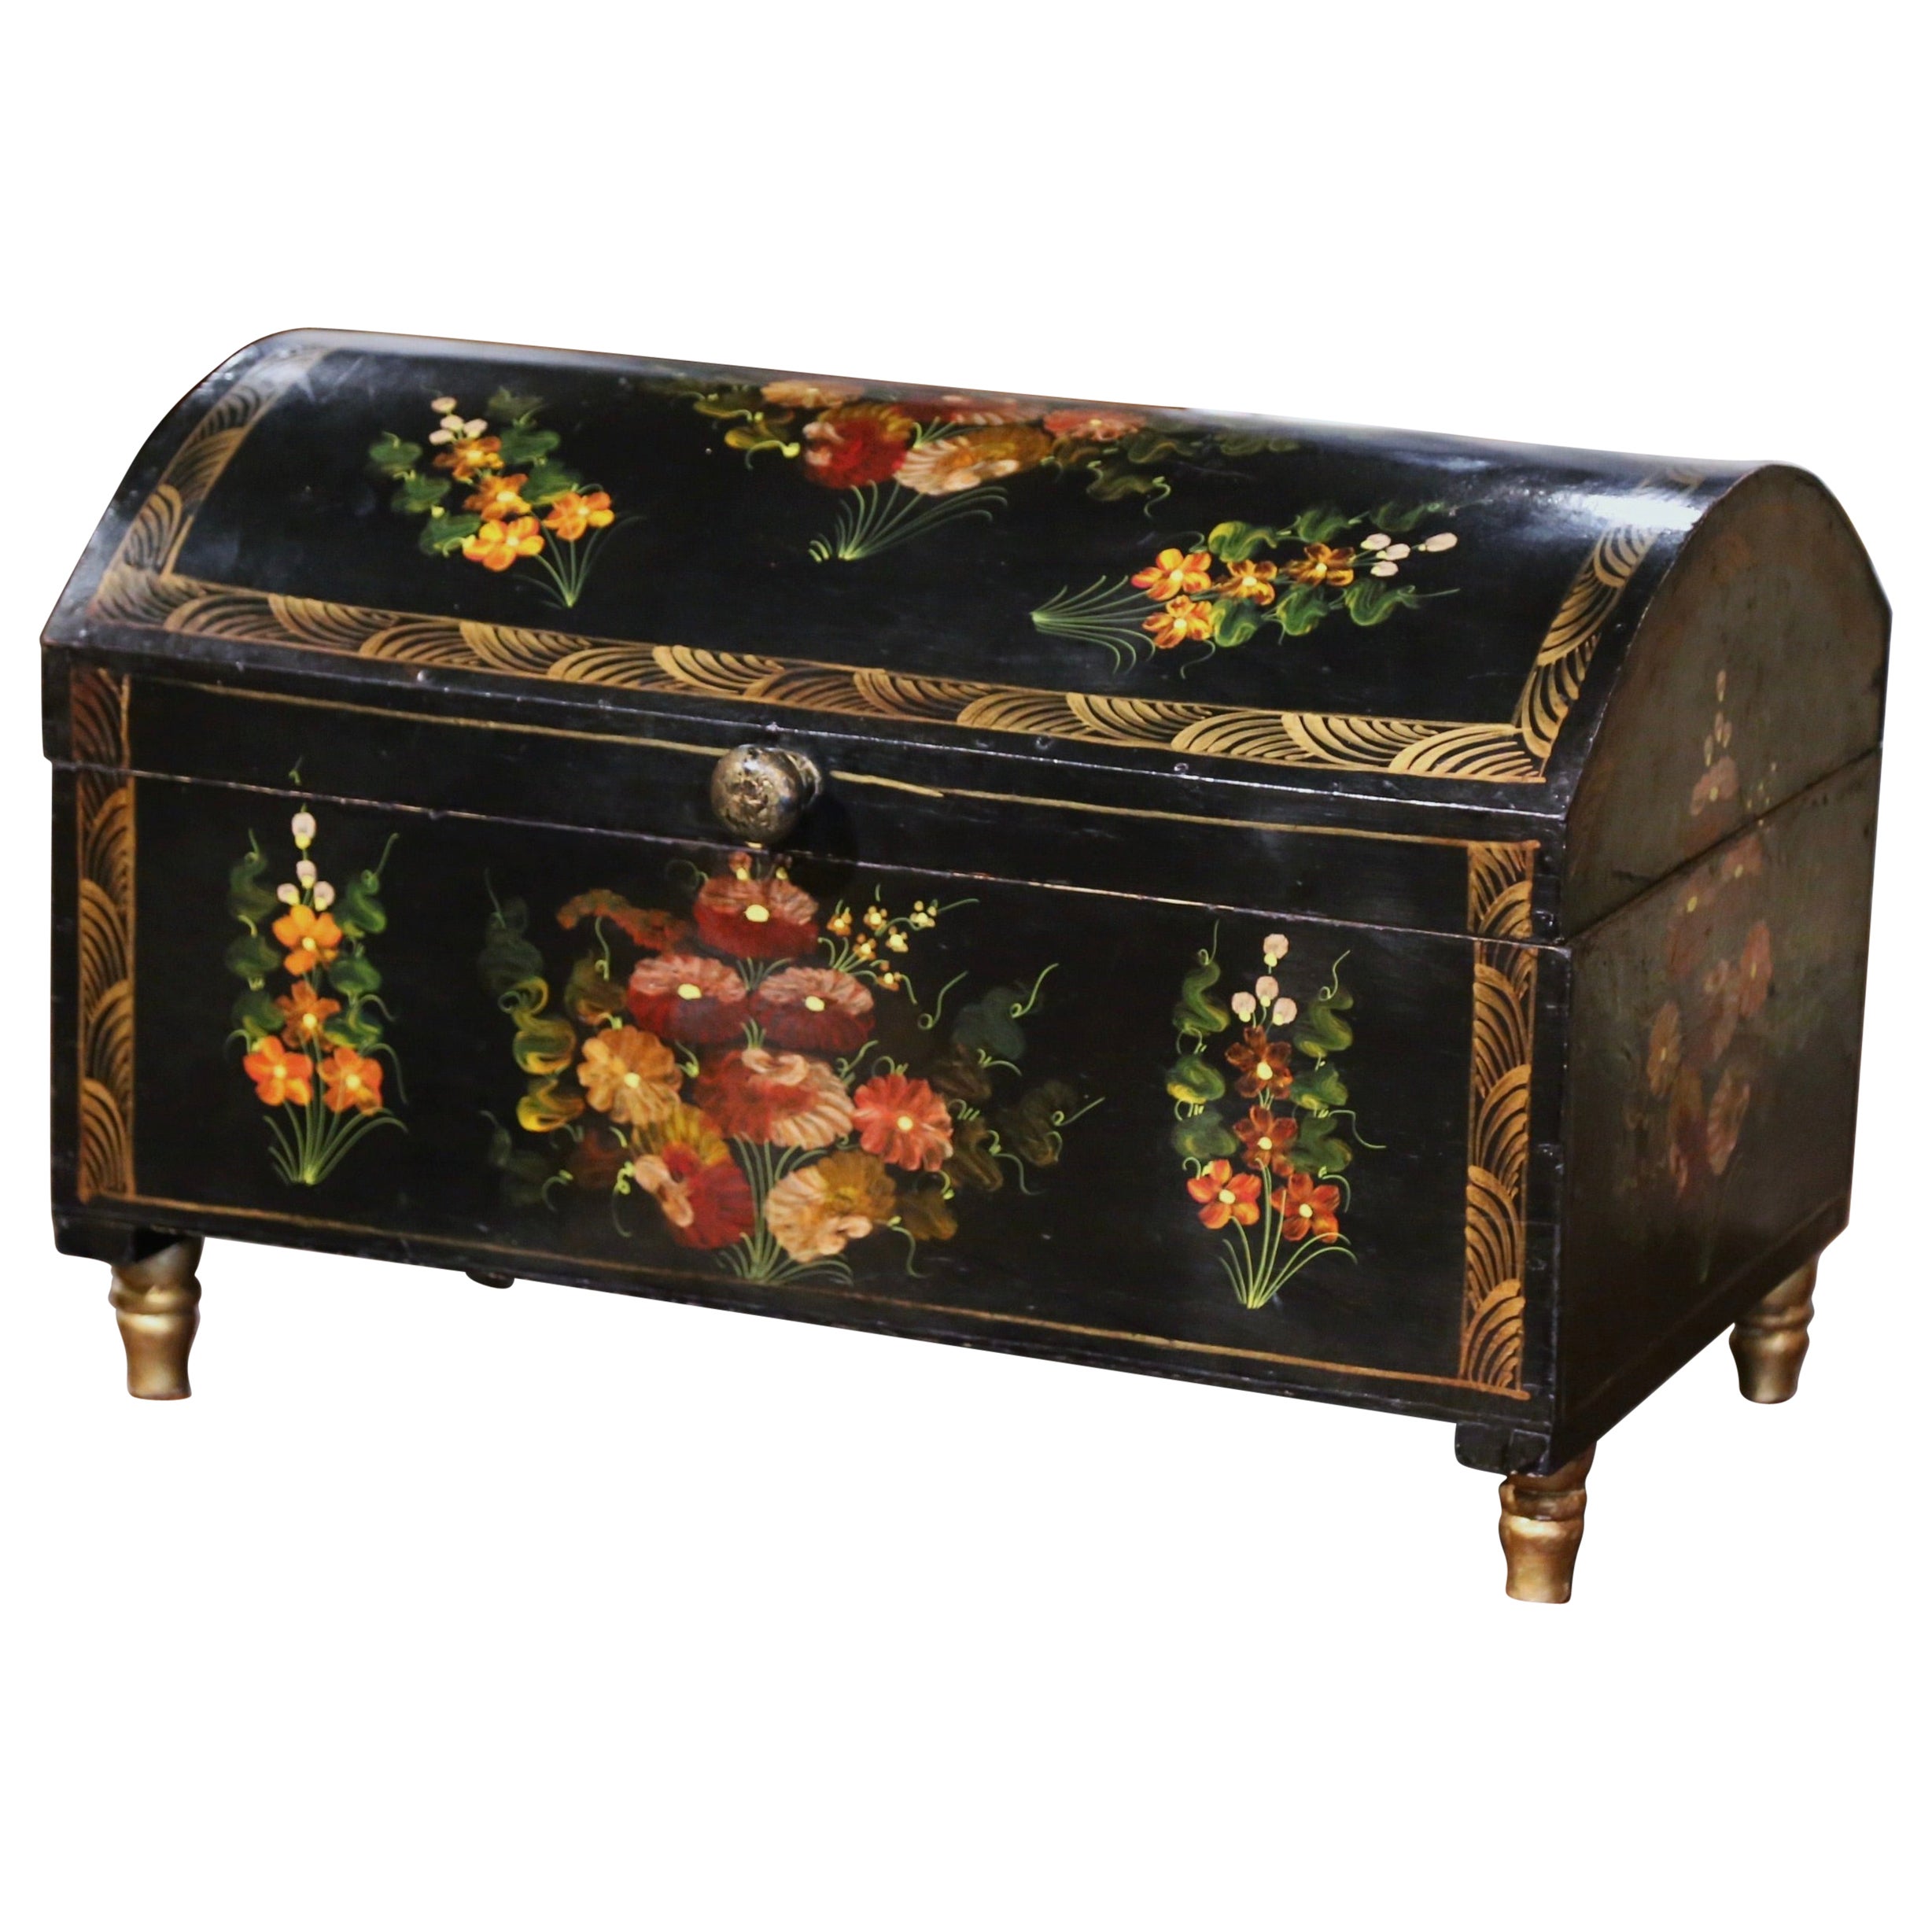 Early 20th Century Spanish Hand Painted Domed Wedding Box with Floral Motifs